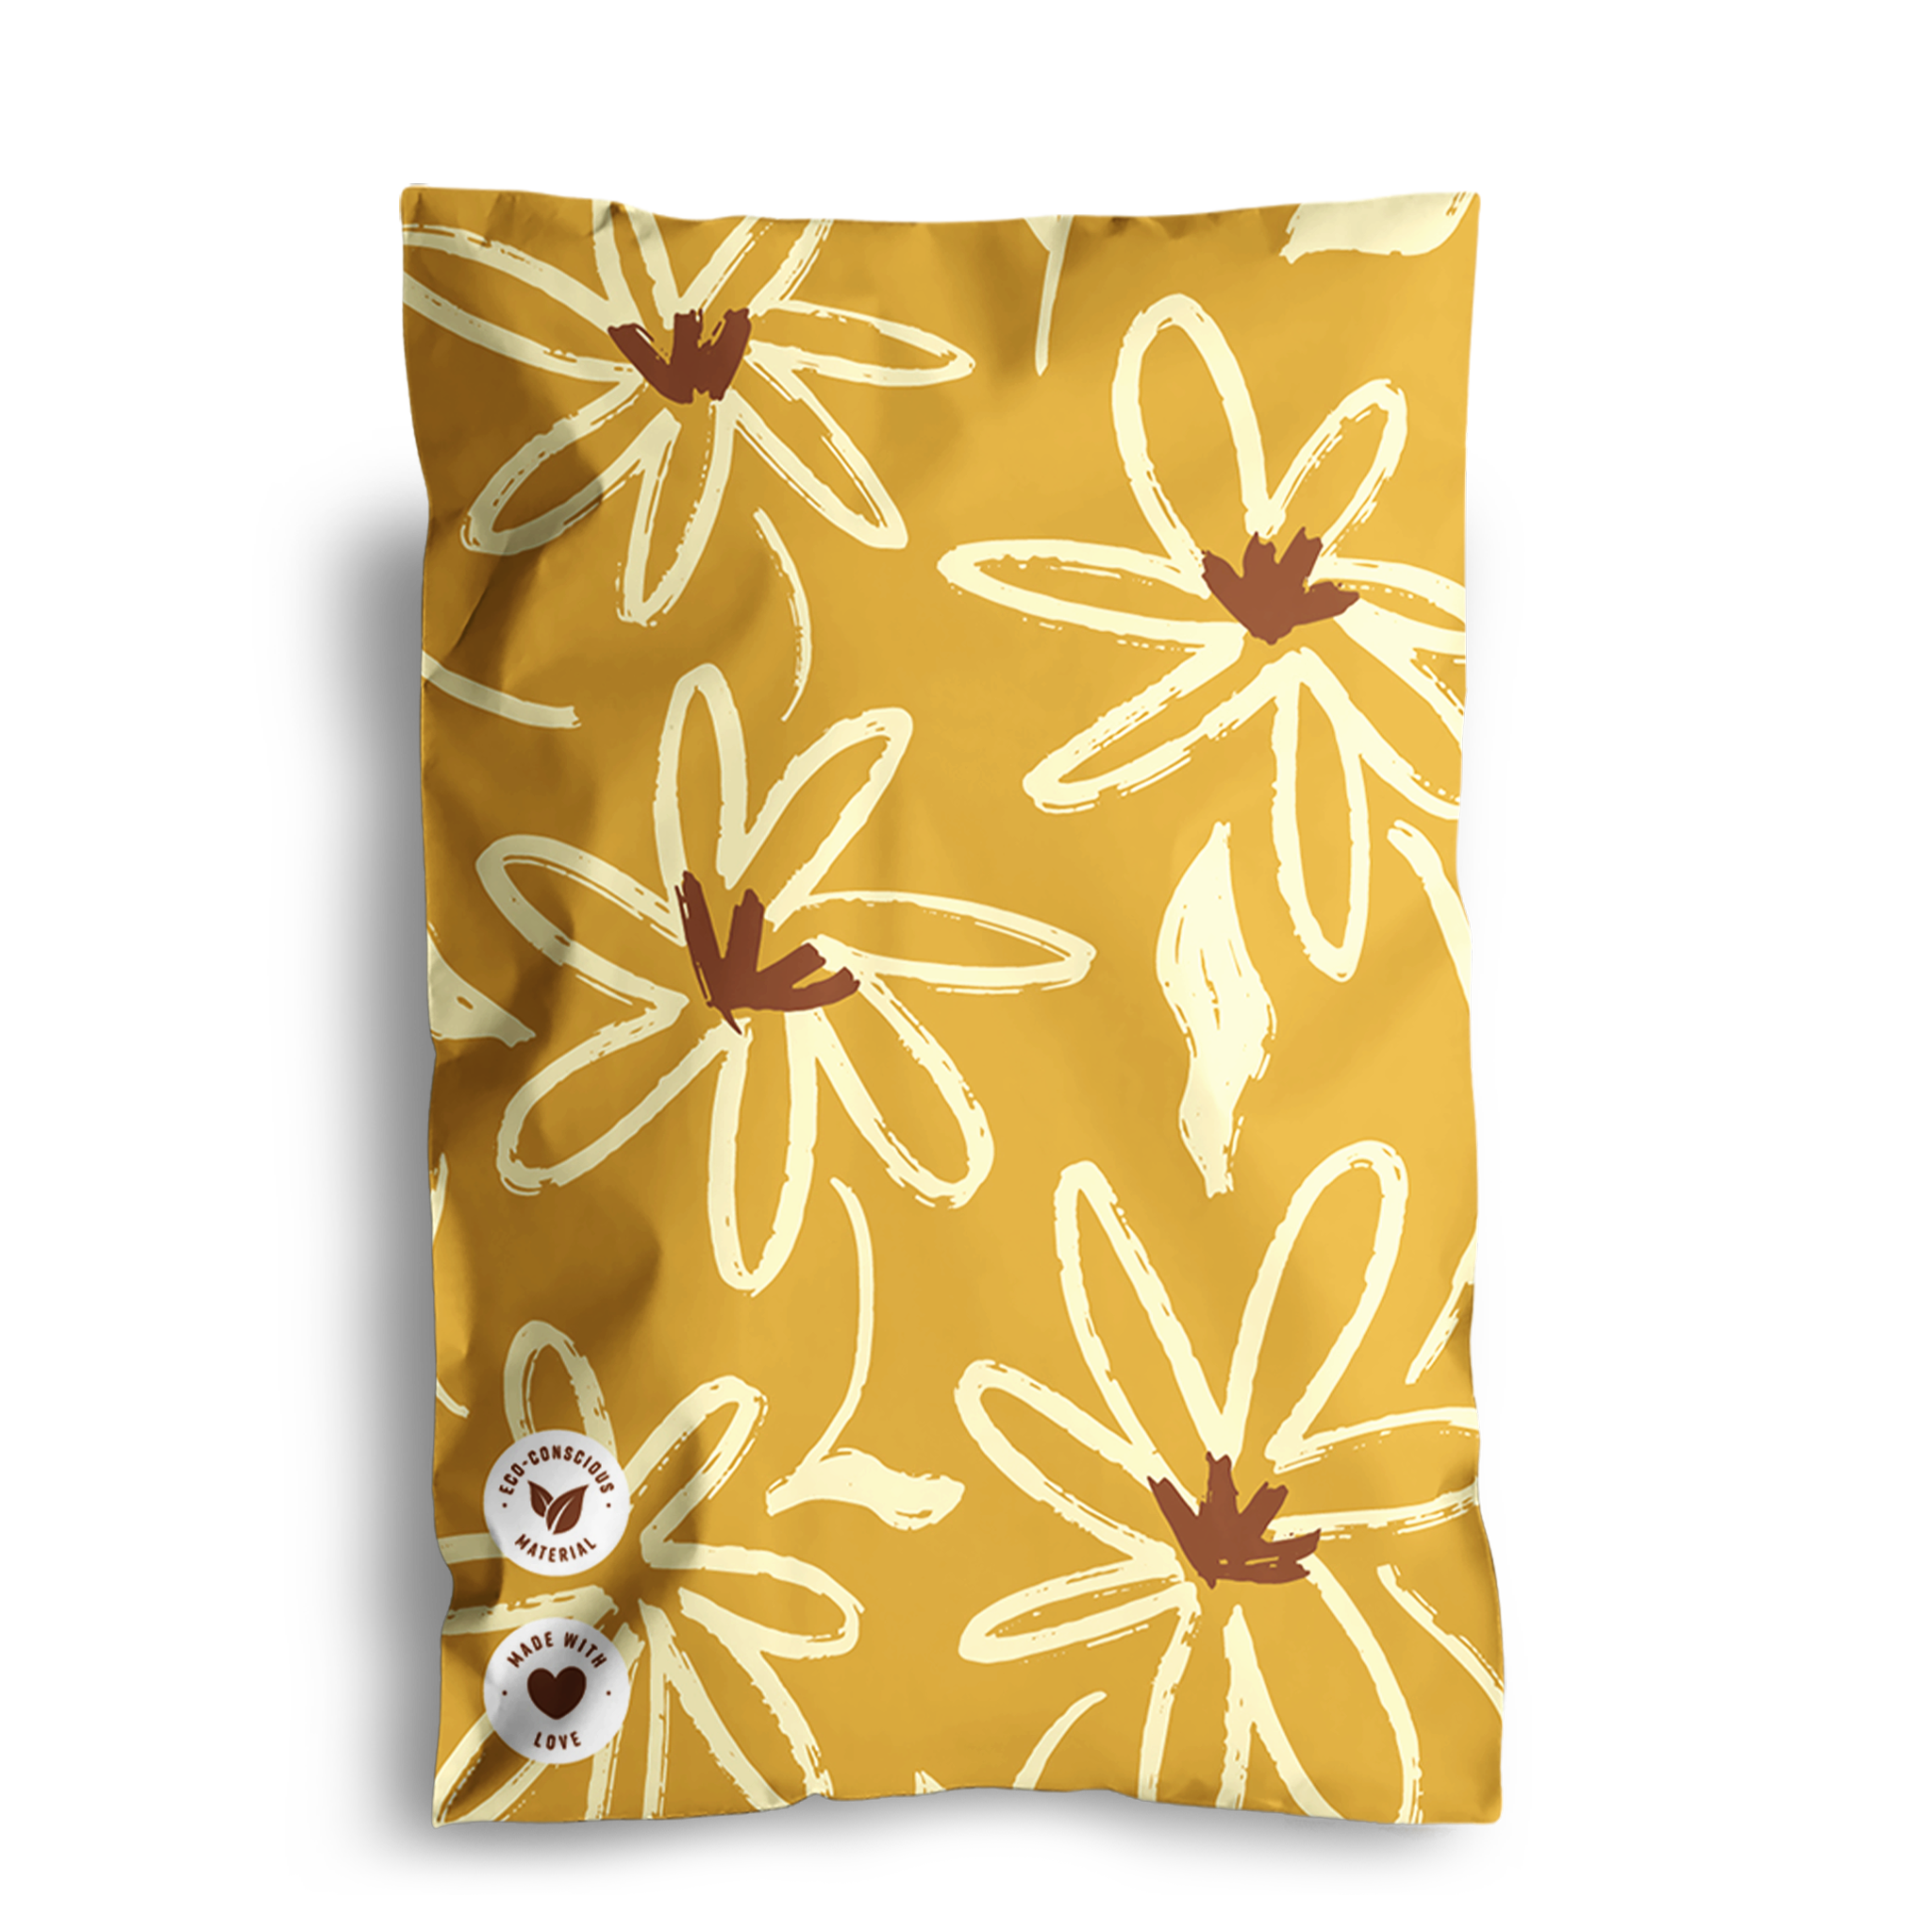 A mustard-yellow bag decorated with white outlined flower illustrations and two small circular stamps near the bottom right corner, perfect for transit protection. Introducing Golden Pencil Floral Mailers 6" x 9" by impack.co.